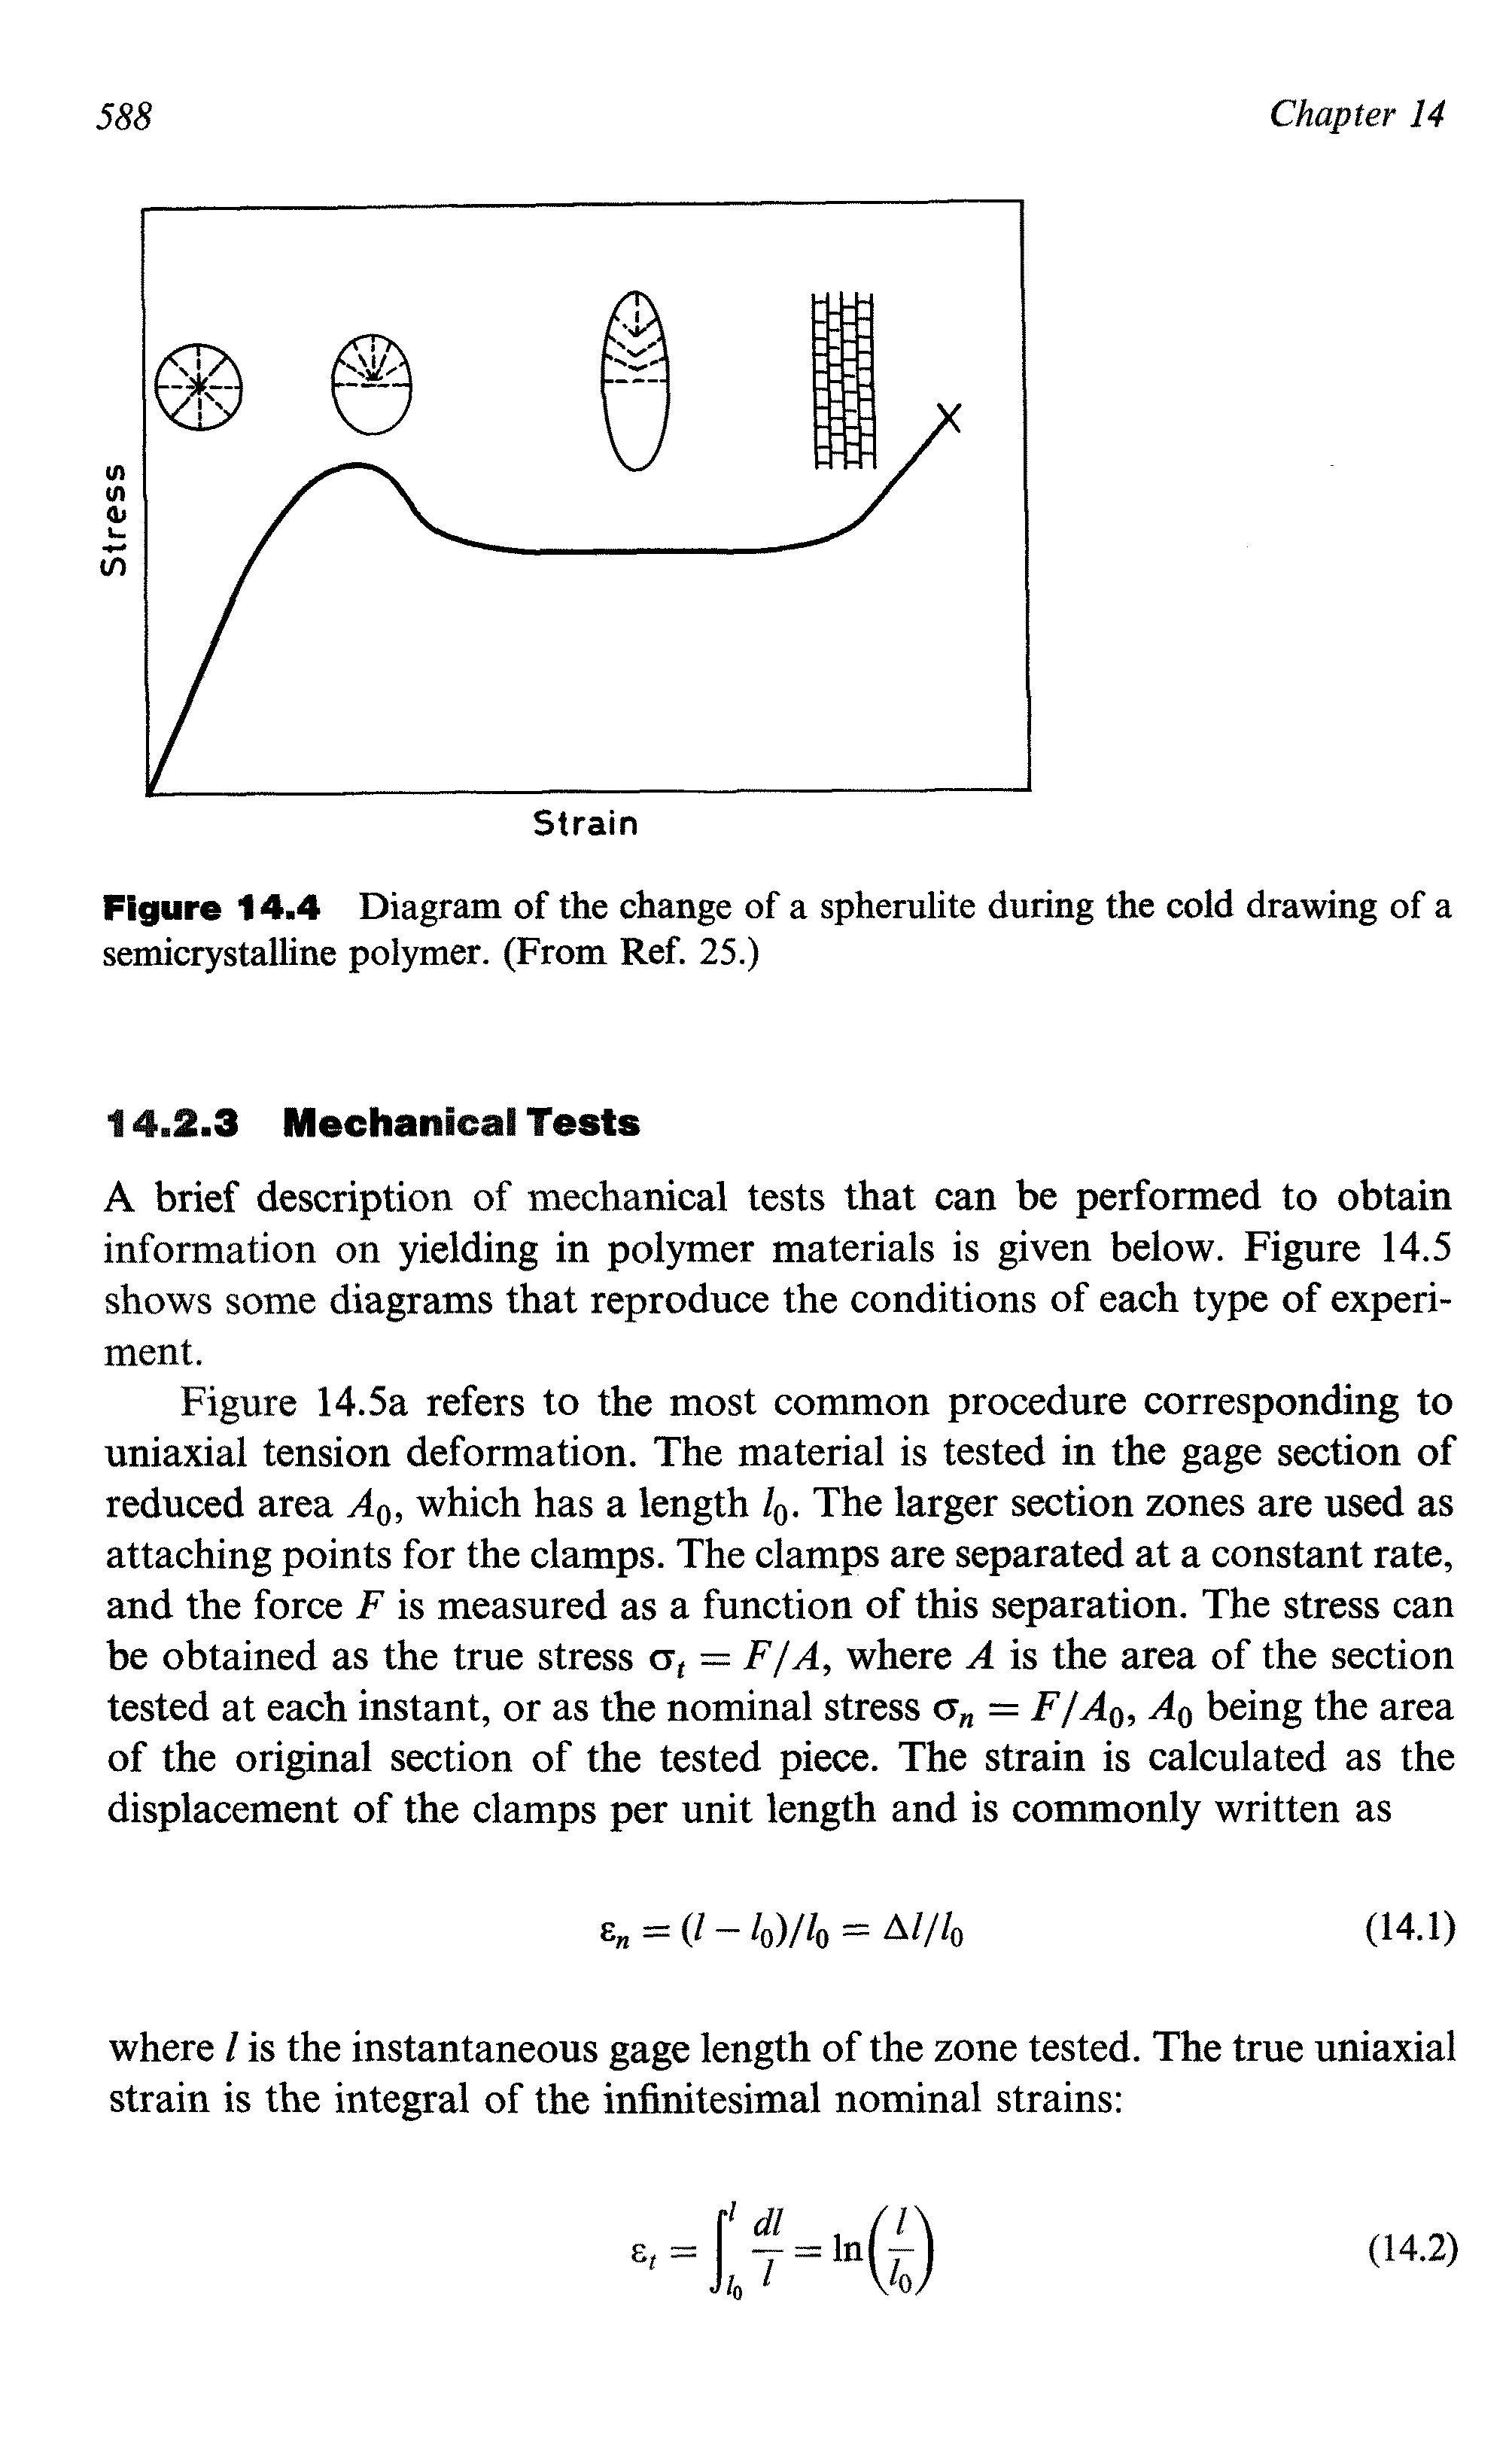 Figure 14.4 Diagram of the change of a spherulite during the cold drawing of a semicrystalline polymer. (From Ref. 25.)...